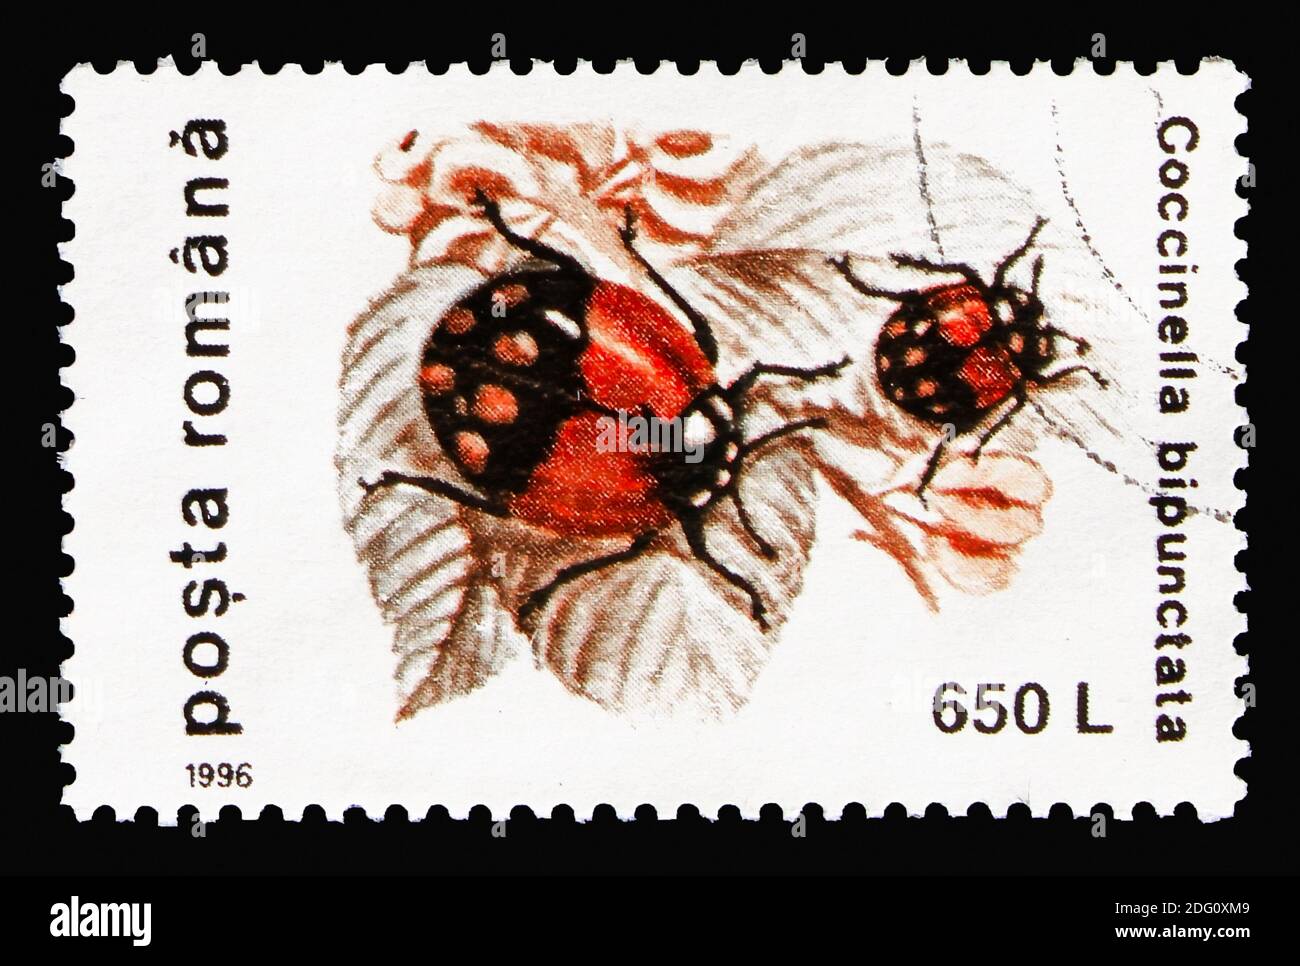 MOSCOW, RUSSIA - AUGUST 18, 2018: A stamp printed in Romania shows Two-spot Ladybird (Coccinella bipunctata), Beetles serie, circa 1996 Stock Photo